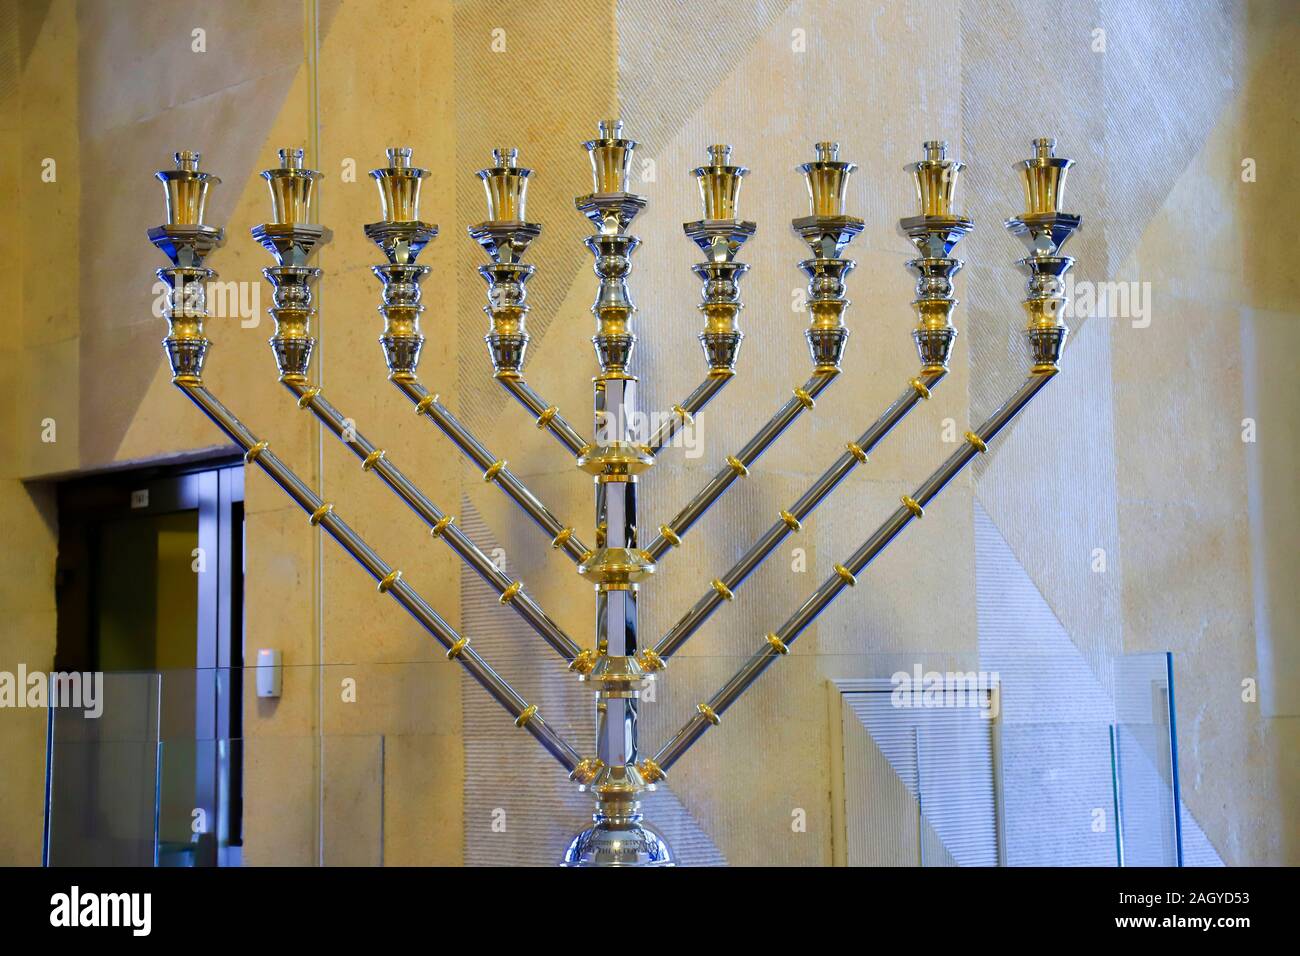 The largest silver Hanukkah, a beautiful candlestick for 9 candles stands in the International Jewish Cultural Religious Center Menorah Stock Photo